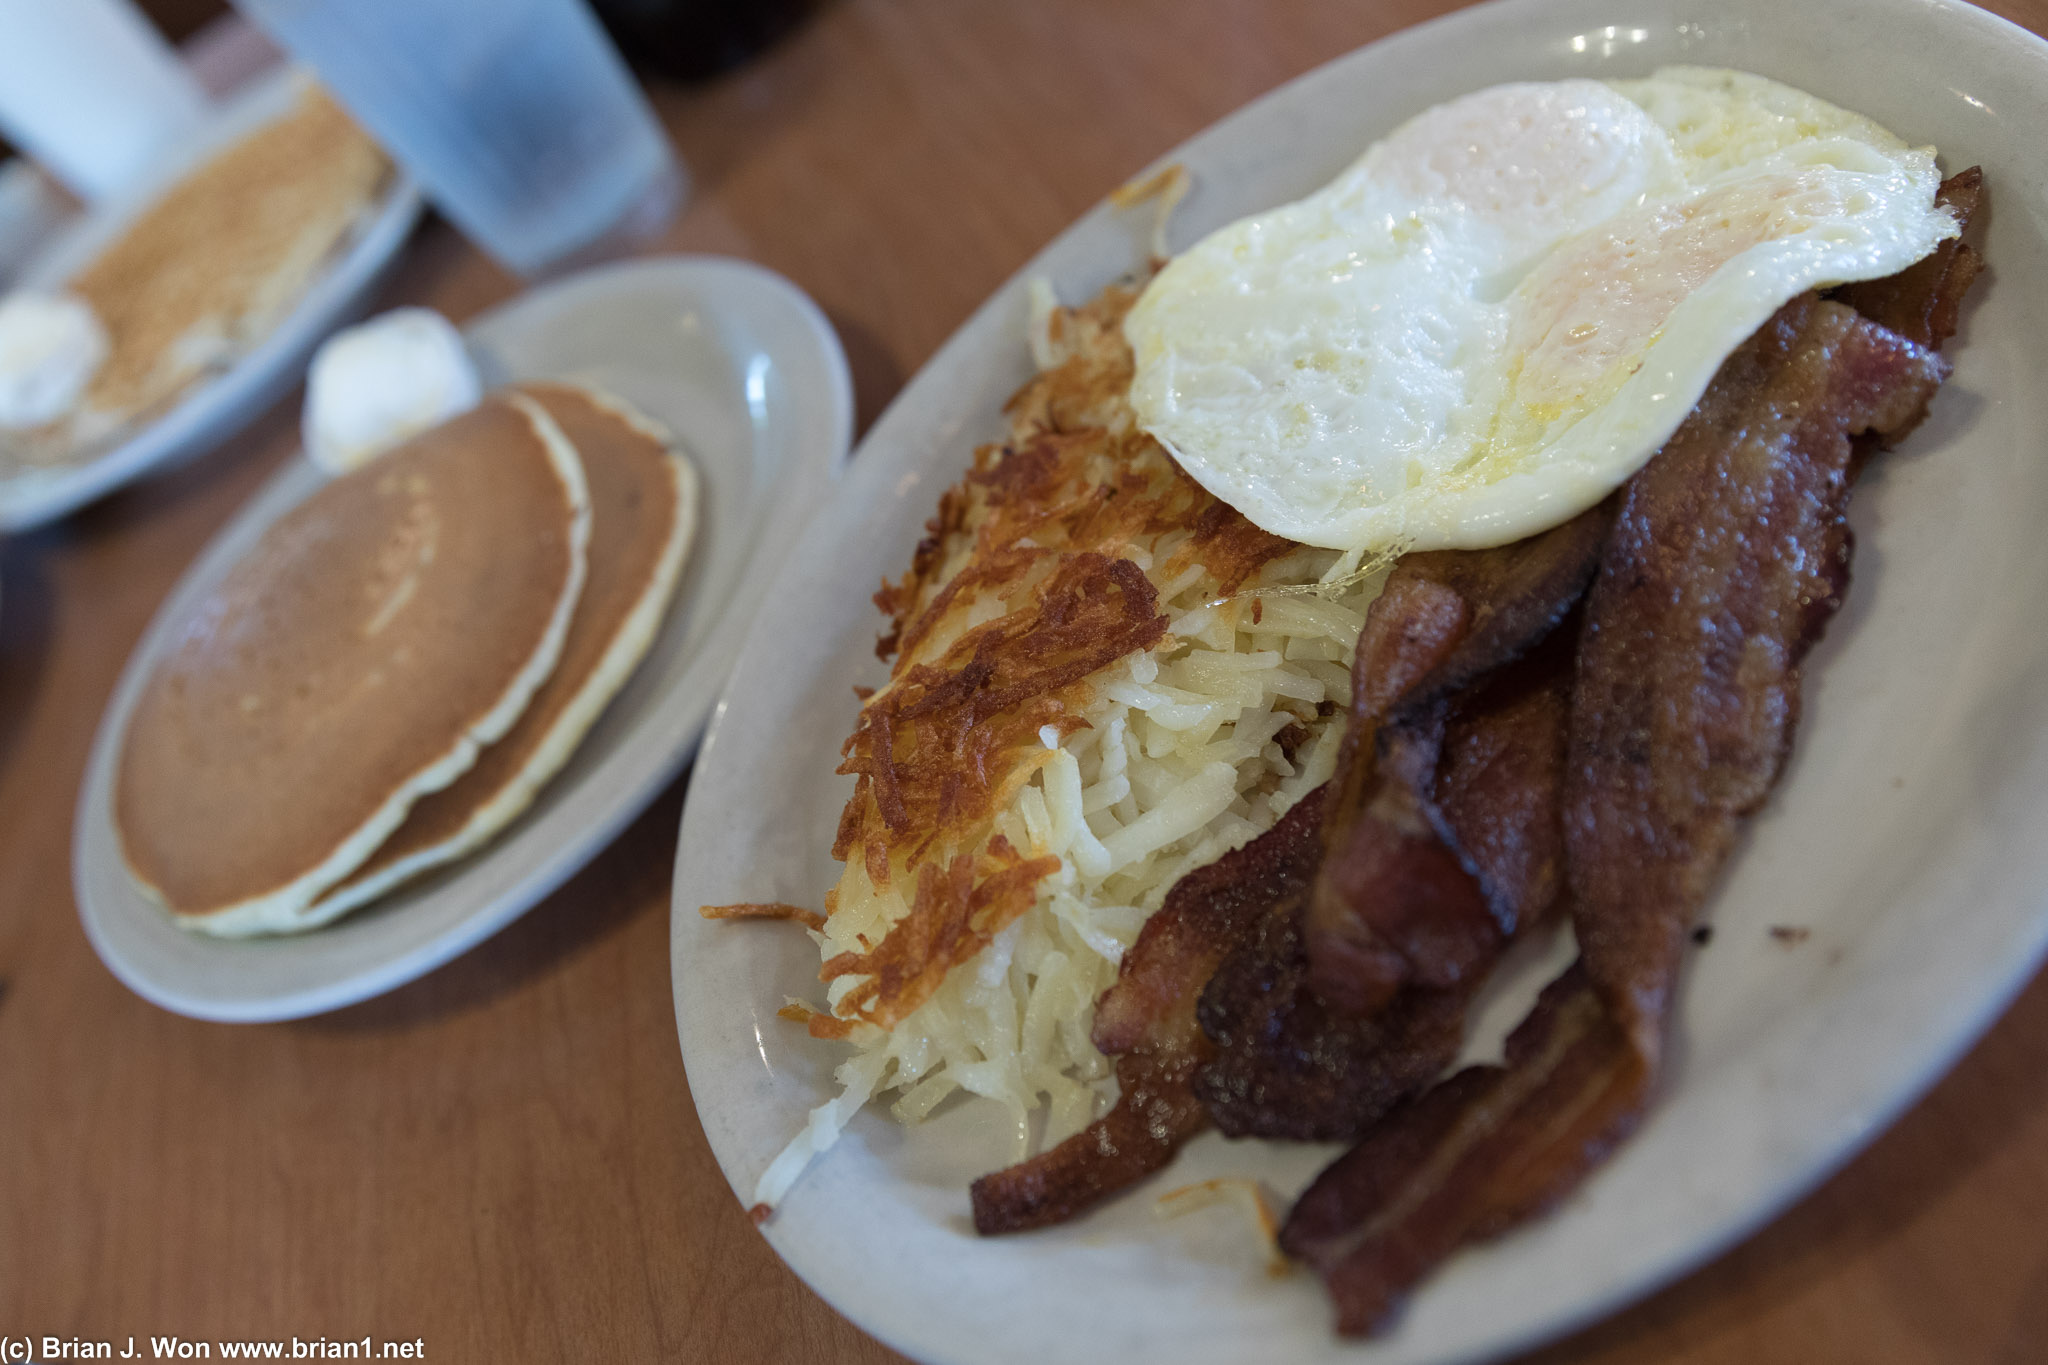 Millbrae Pancake House. Not bad, but hashbrowns were better than the pancakes.